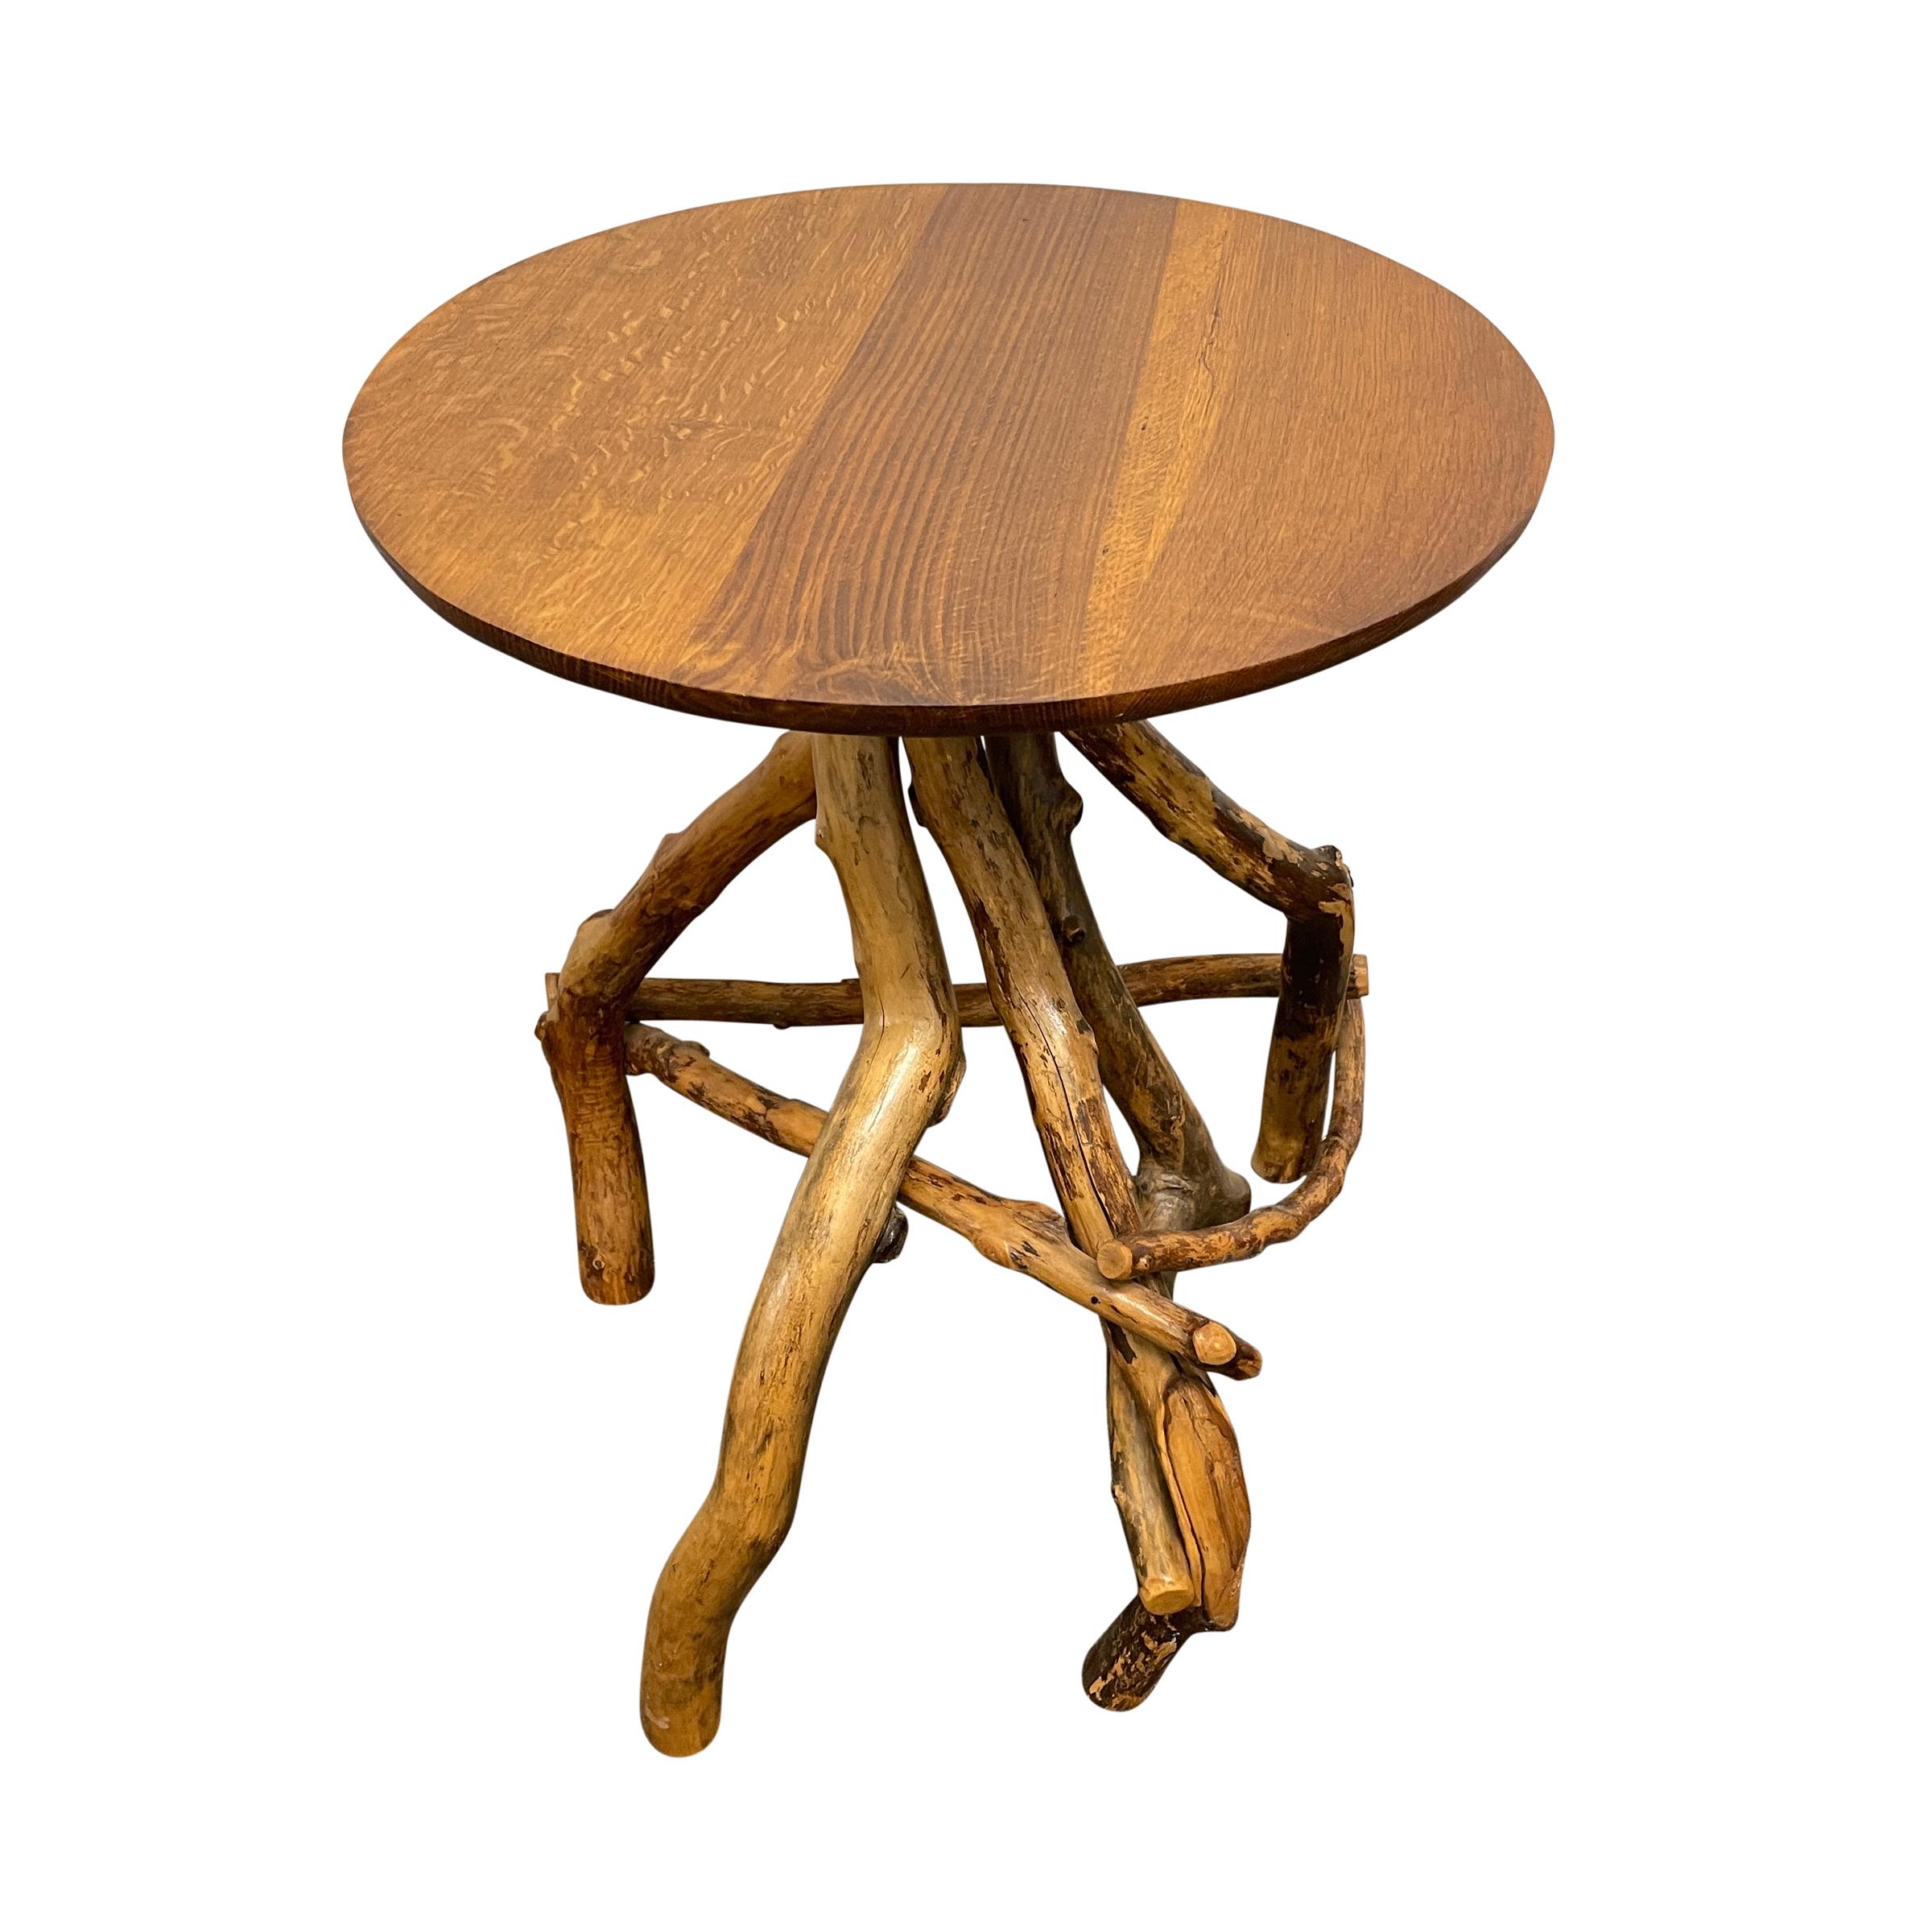 20th Century American Rootwood Side Table